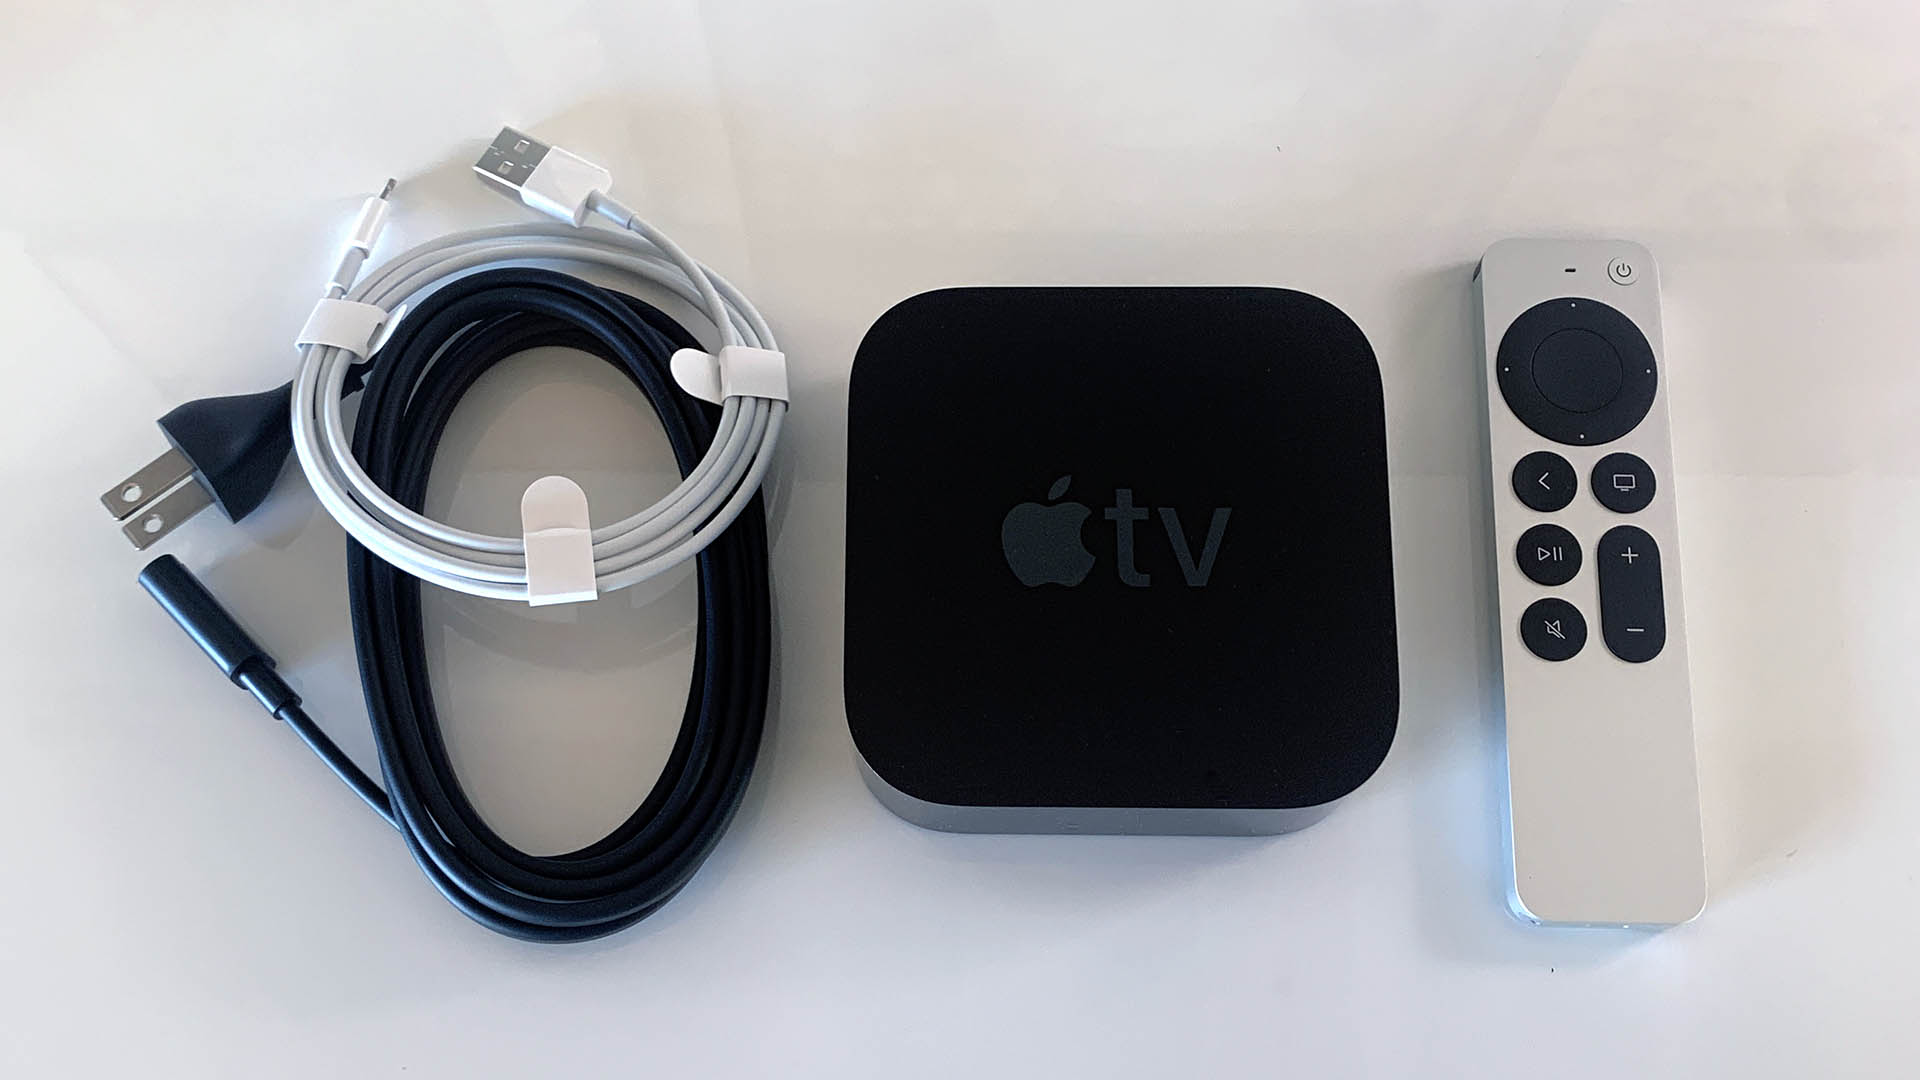 Physical Hd Apple Tv Show Wallpapers